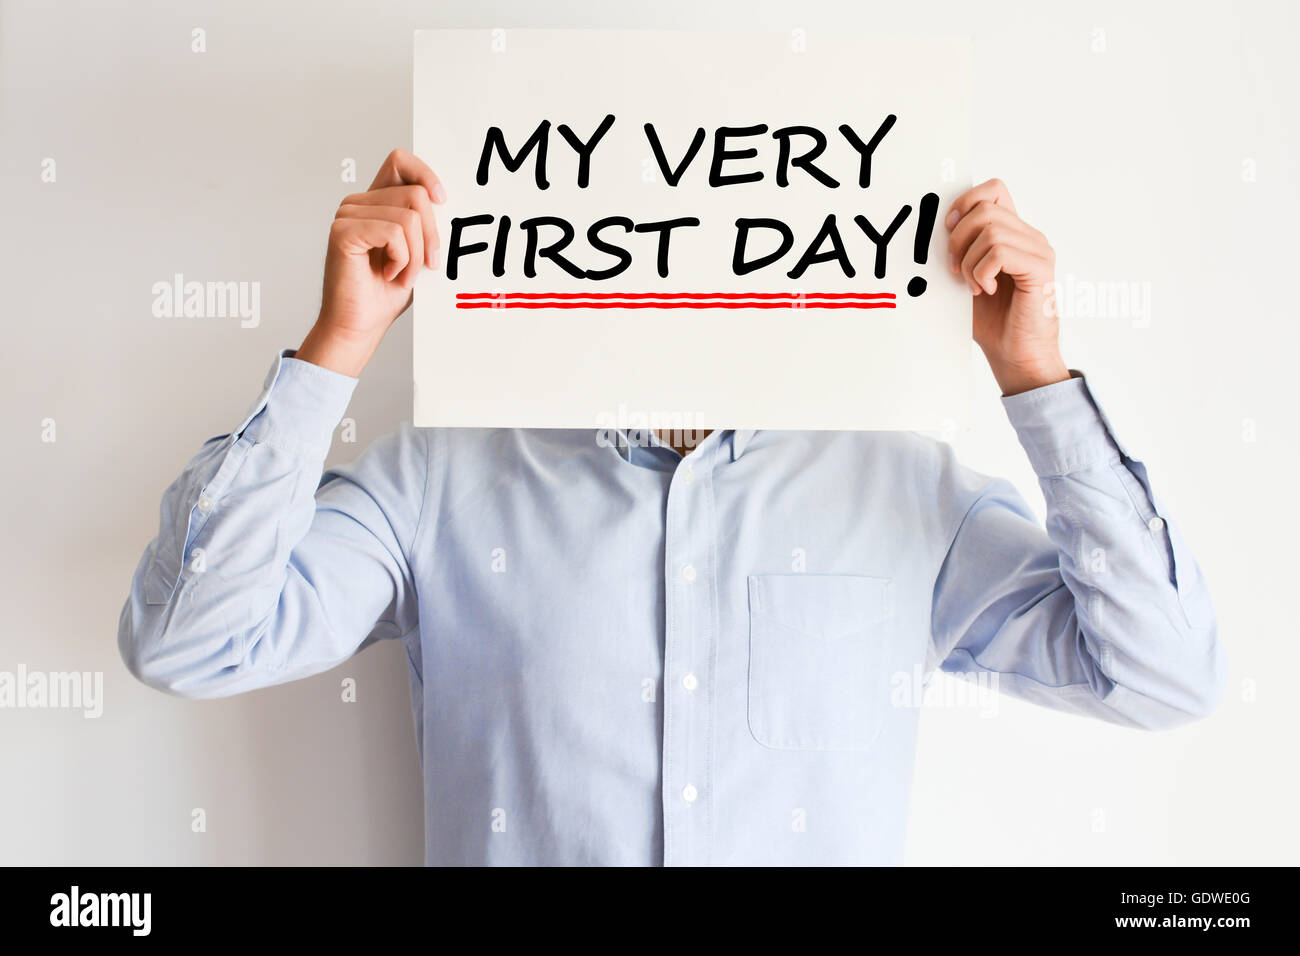 first work day from my career concept Stock Photo